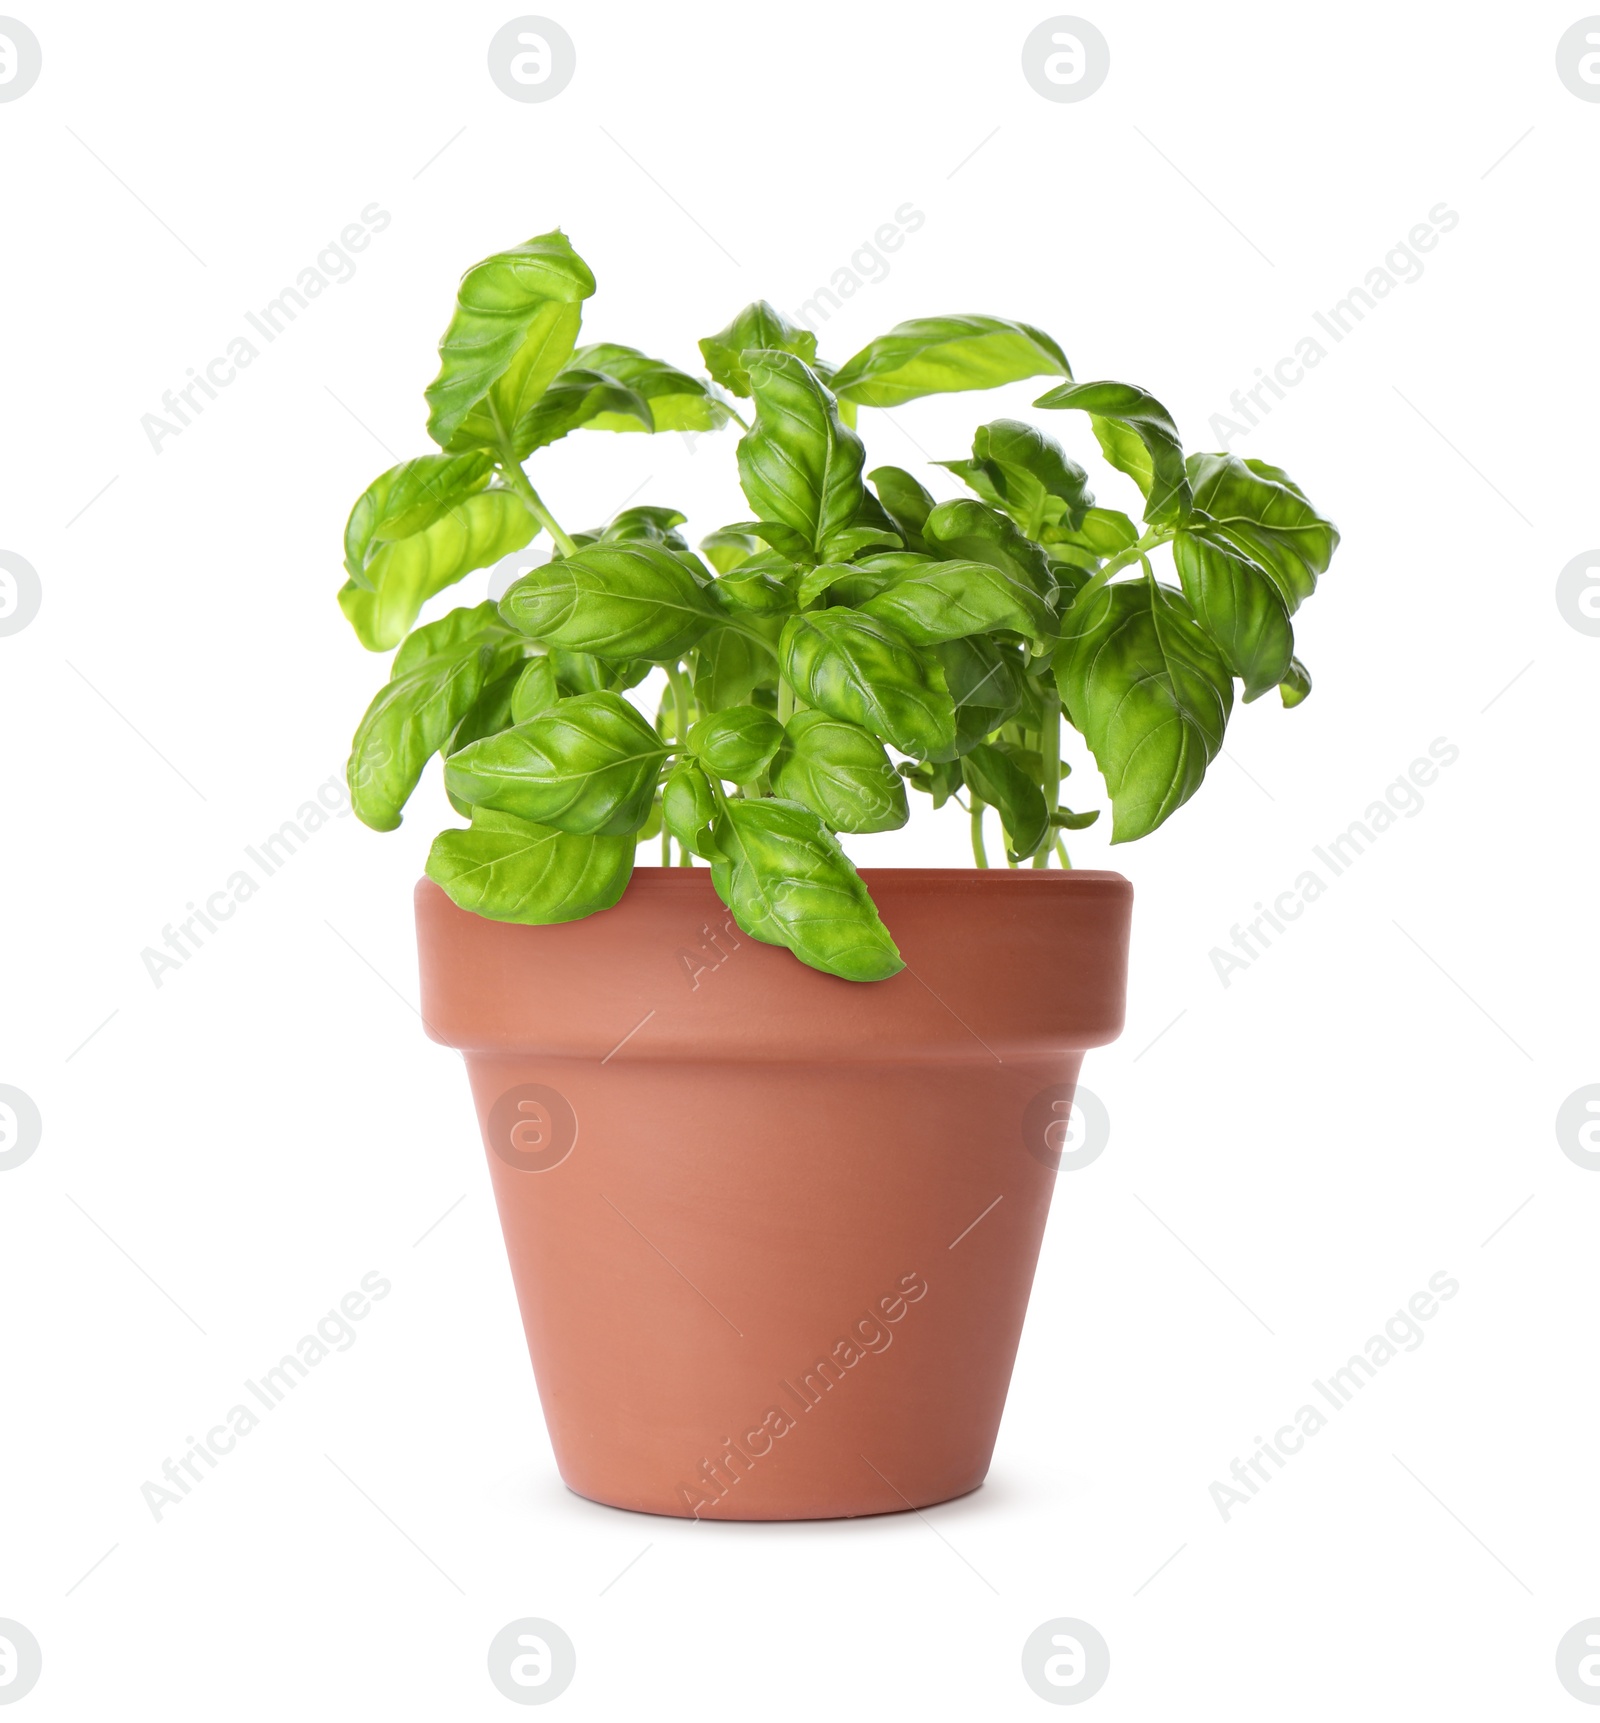 Image of Green basil in clay pot isolated on white